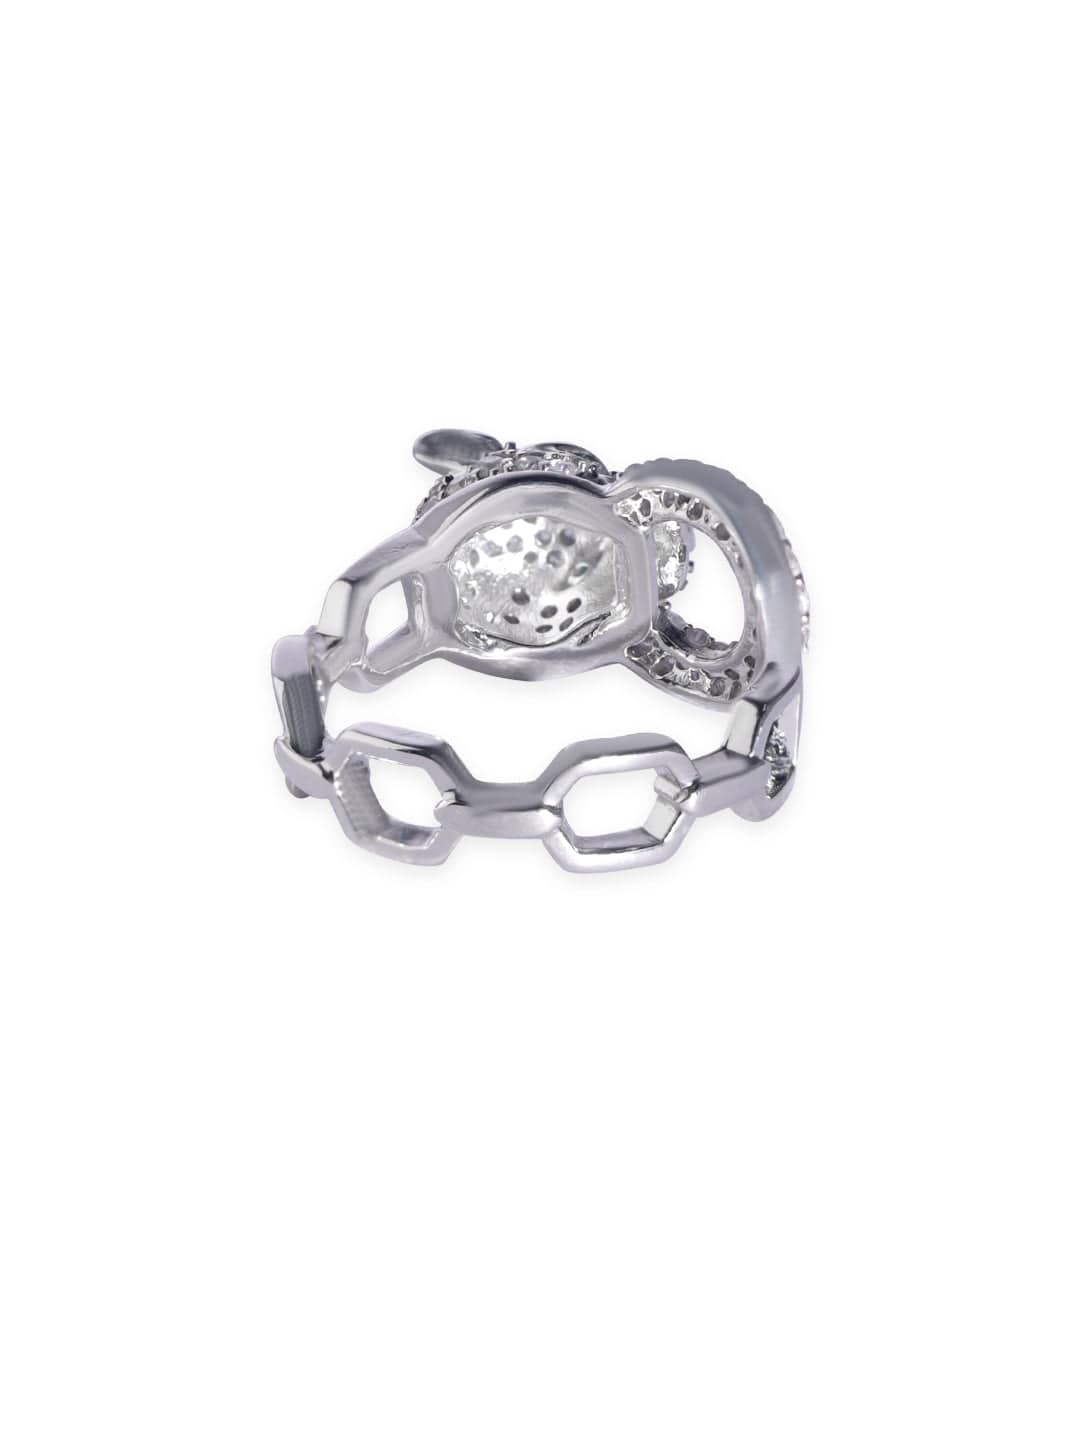 Rubans Voguish Timeless Sparkle AD Studded Stainless Steel Adjustable Ring Rings